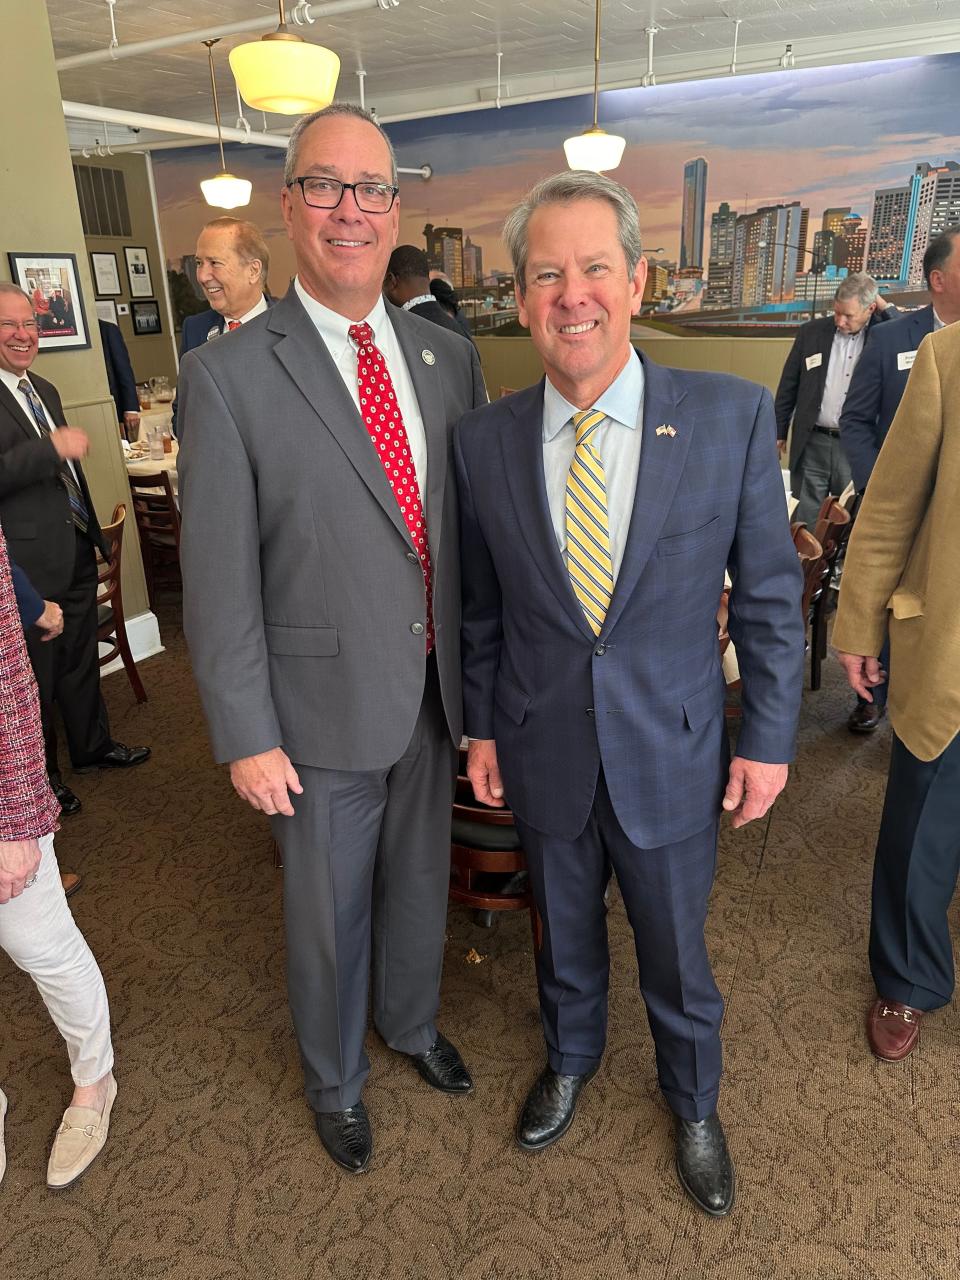 From left: Bryan County Chairman Carter Infinger and Georgia Gov. Brian Kemp are photographed.